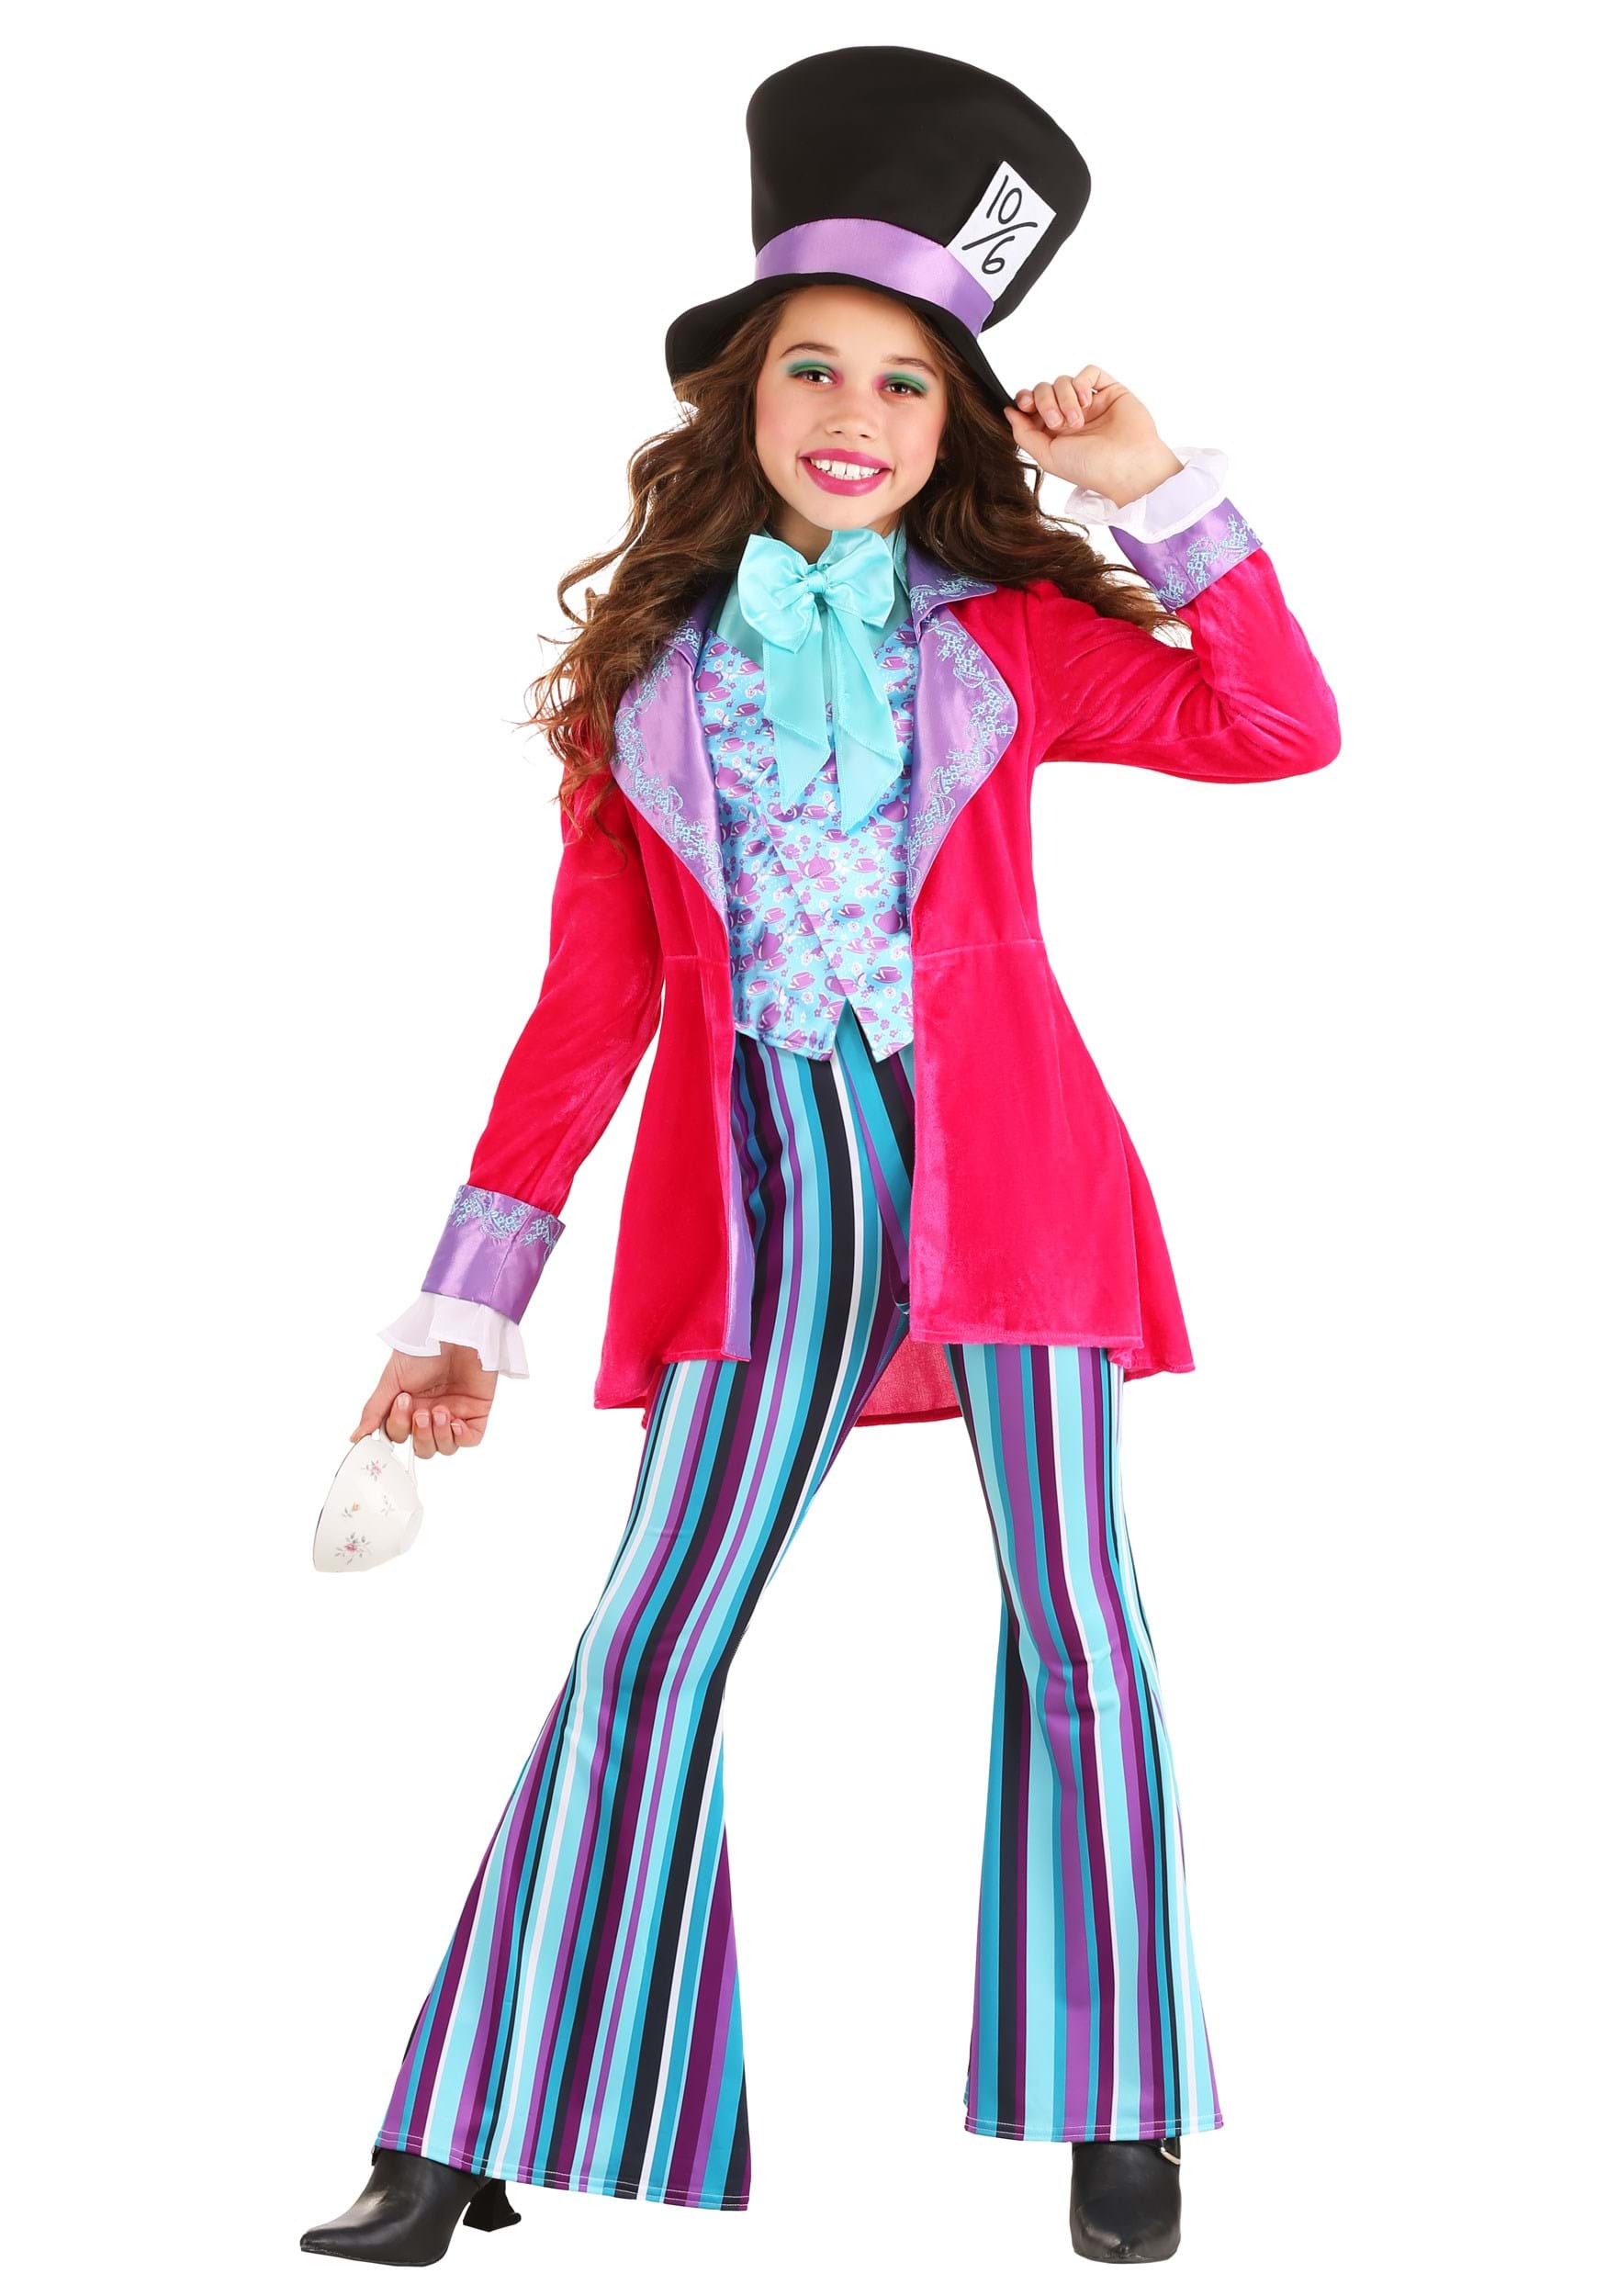 https://images.halloweencostumes.com/products/66388/1-1/whimsical-mad-hatter-costume-for-girls.jpg